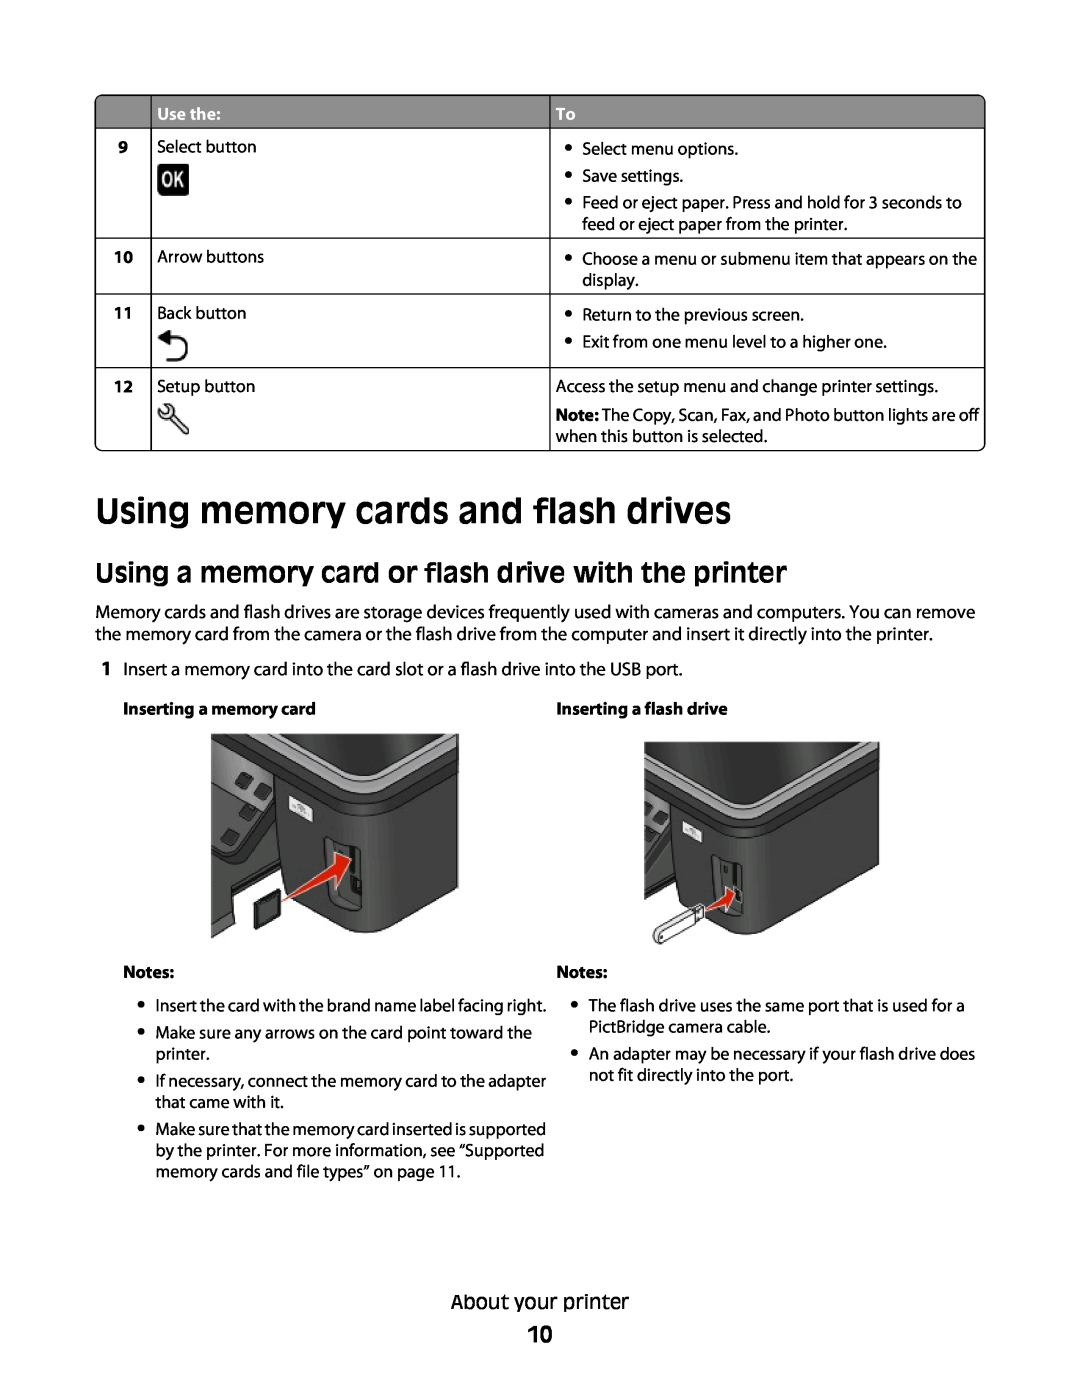 Lexmark S300 manual Using memory cards and flash drives, About your printer, Use the 